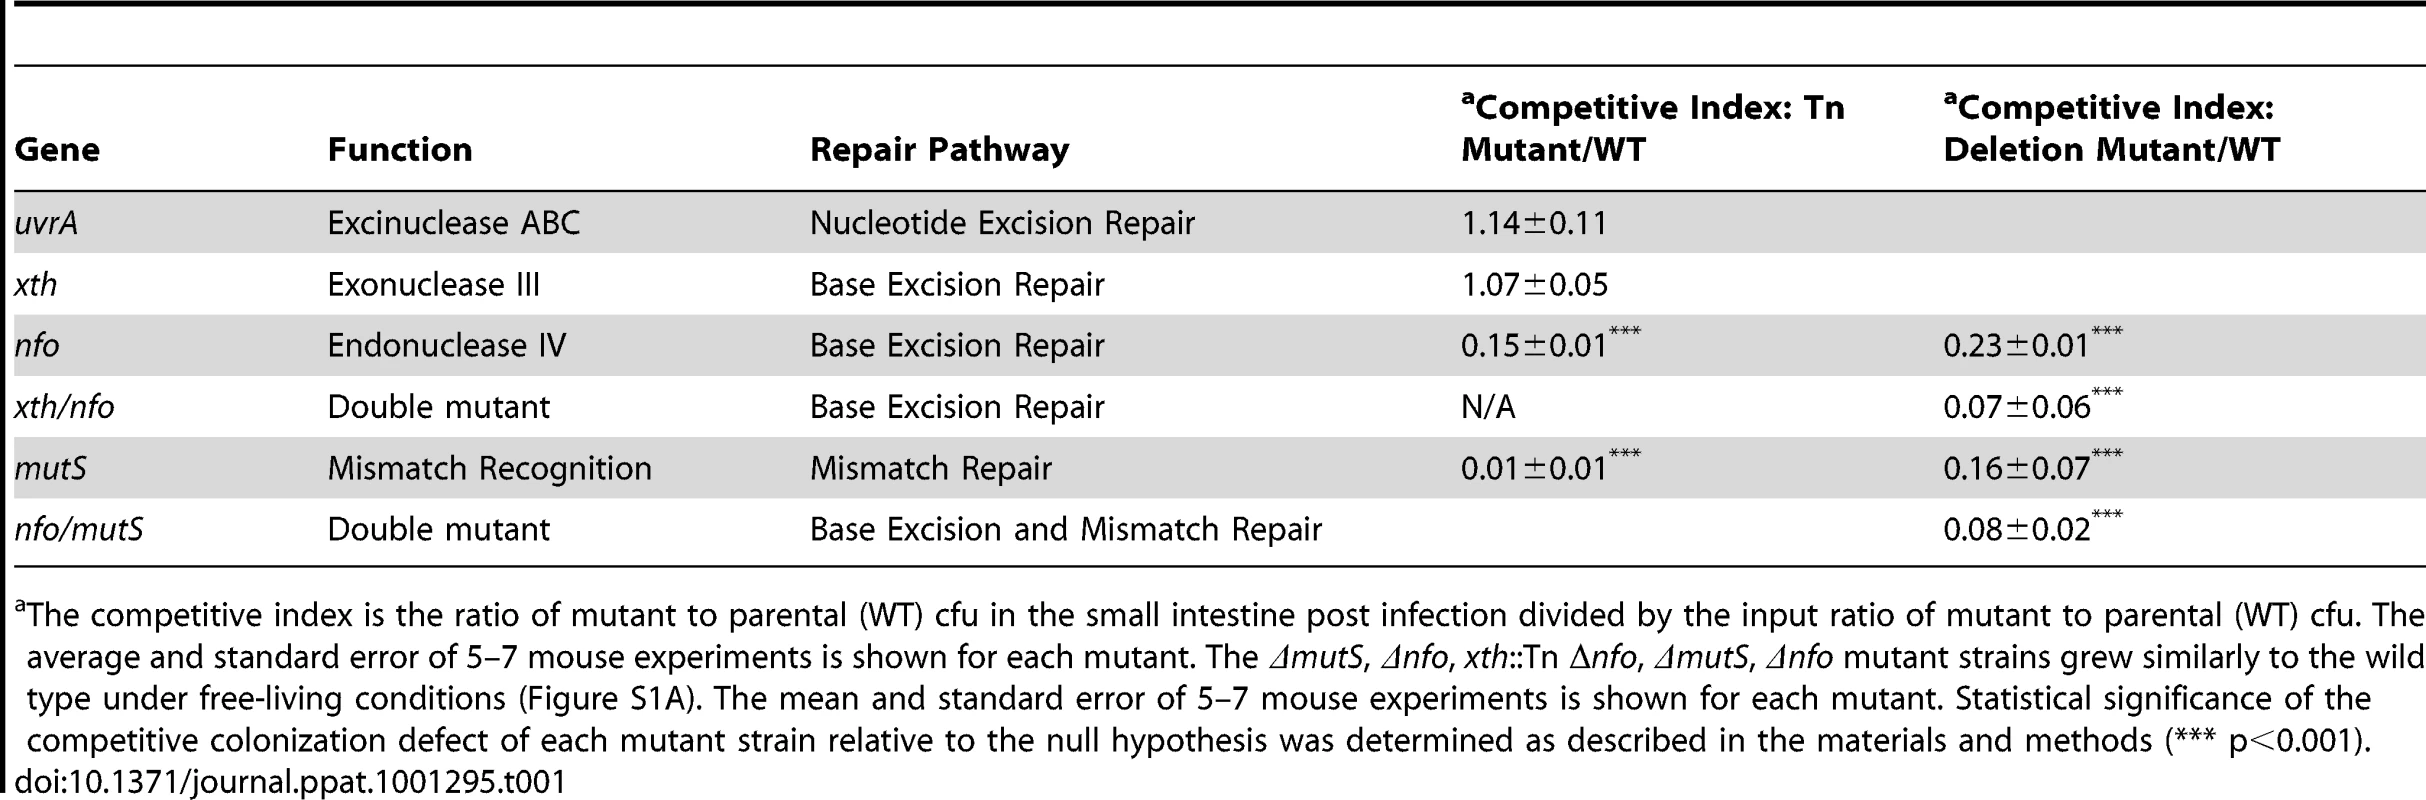 Ability of <i>V. cholerae</i> mutants defective in DNA repair pathways to colonize the infant mouse intestine in competition with the parental strain (WT).